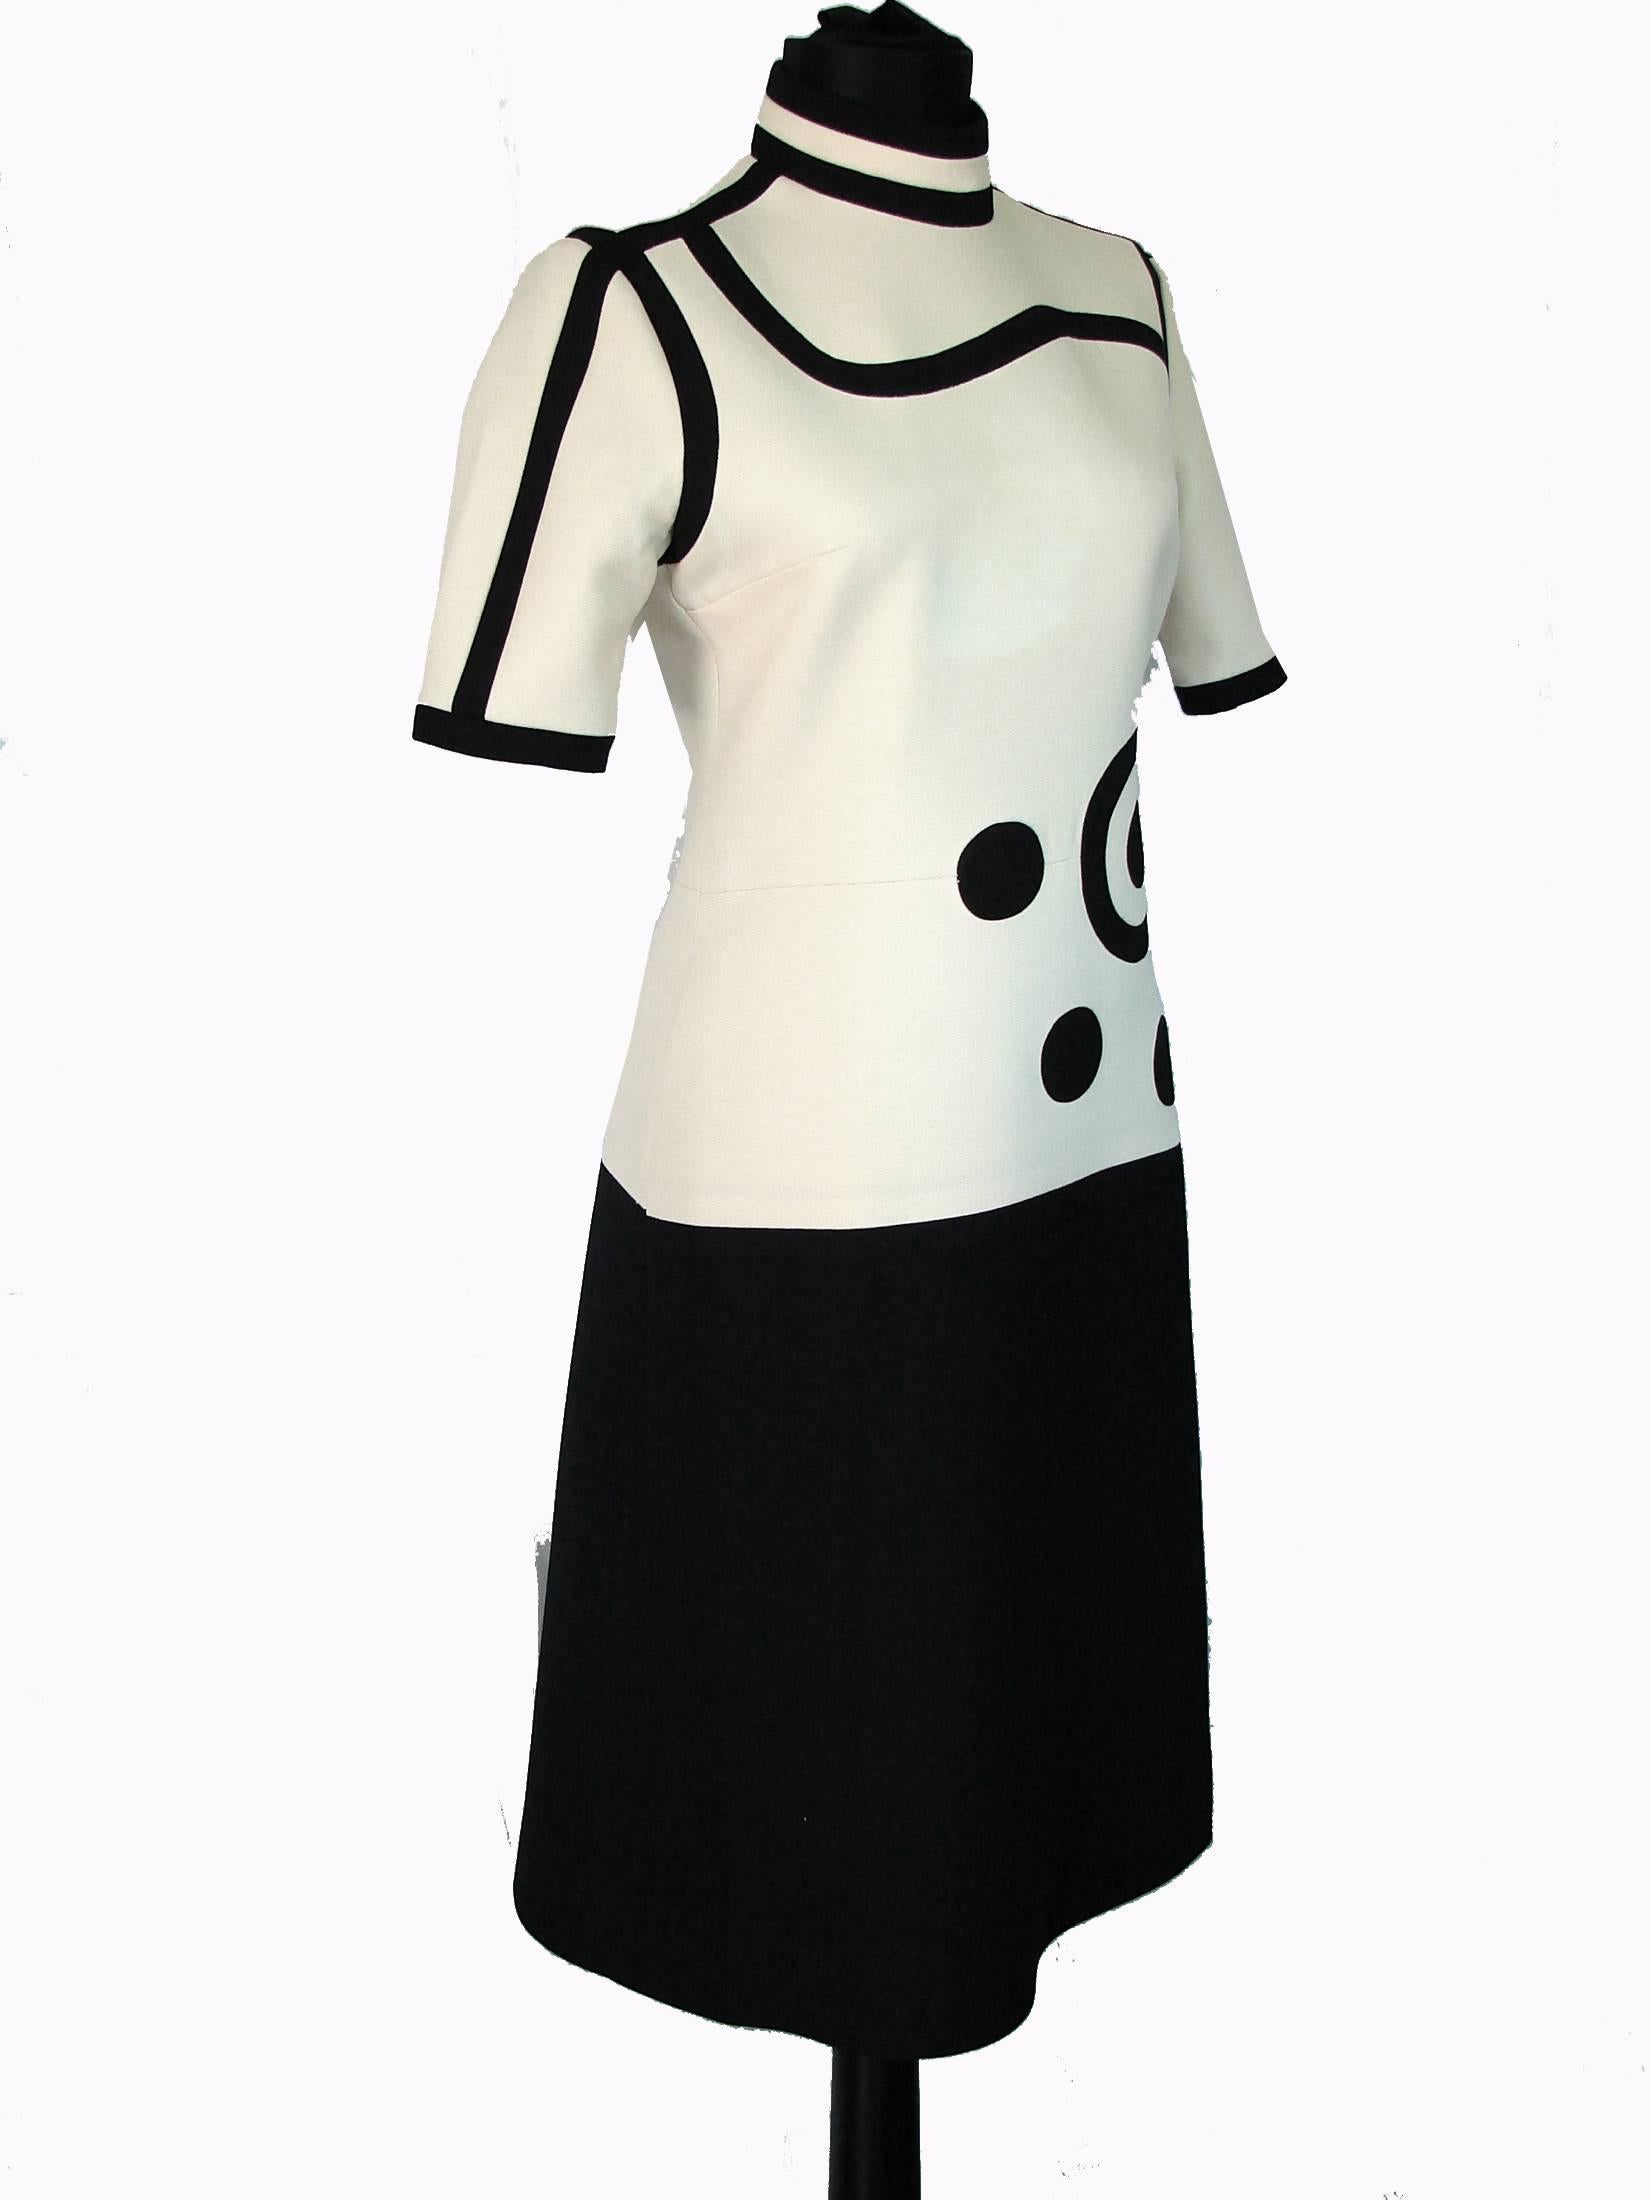 Here's a wonderful example of Louis Ferauds early work.  Made from what we believe is wool (no content tag), this dress bodice features black Op Art circles against a cream background, and the skirt is solid black! Very mod, yet very chic! In